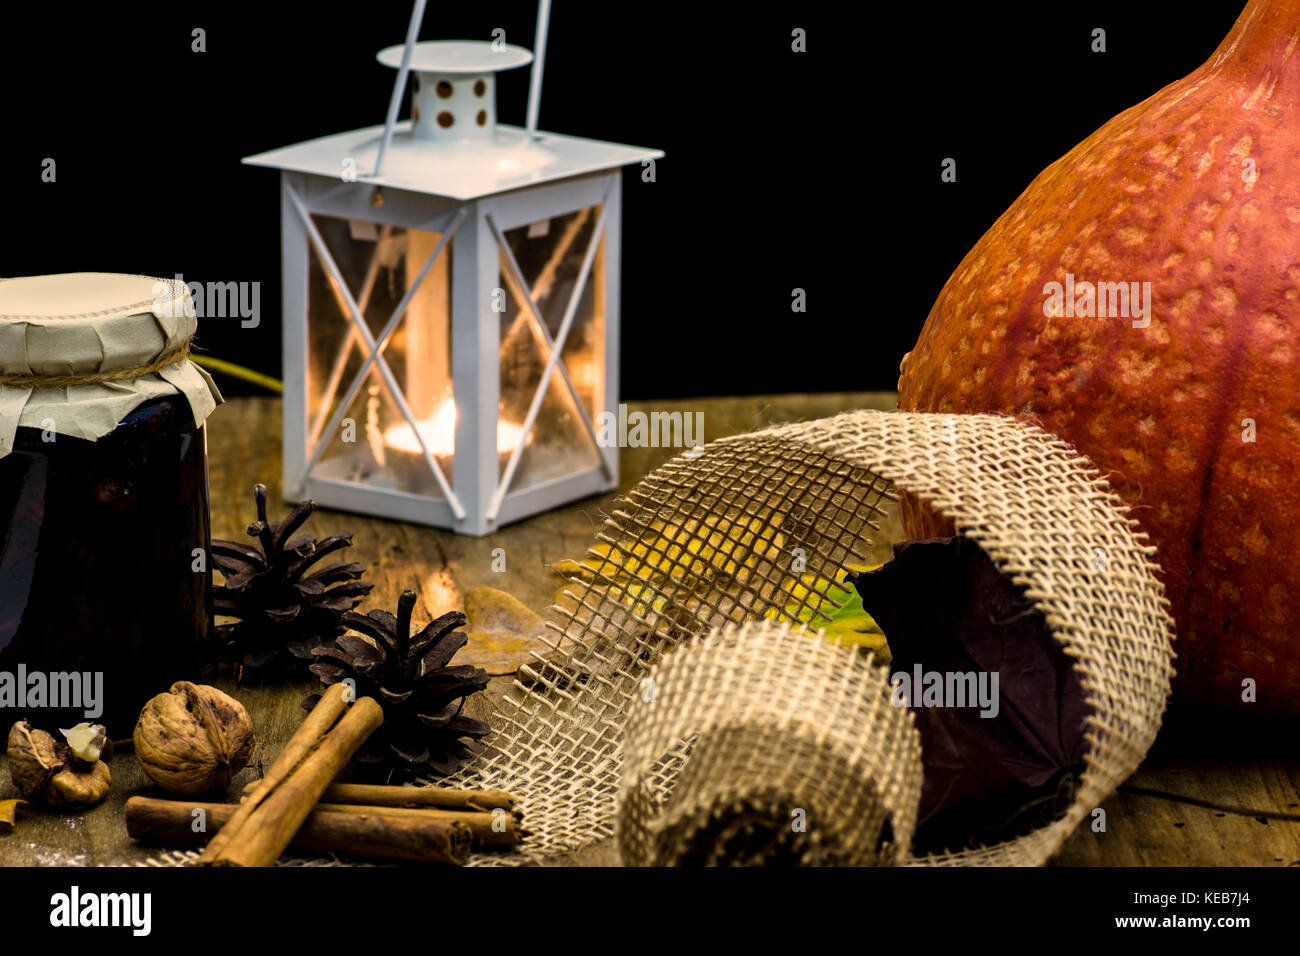 Dark autumn still life with pumpkin, candle and lamp, with yellow leaves of trees on old wooden table board - atmosphere with warm colors Stock Photo